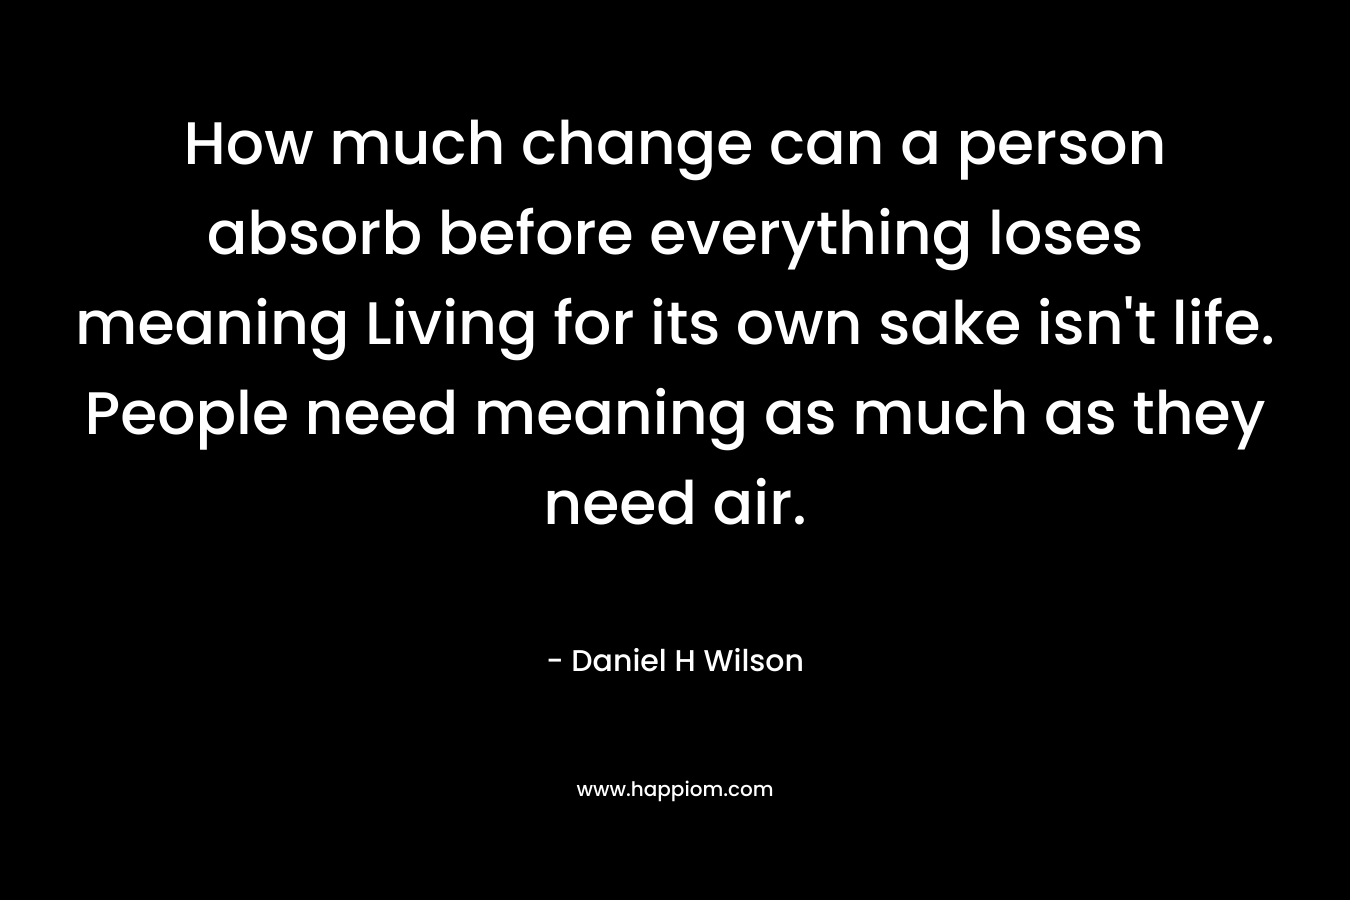 How much change can a person absorb before everything loses meaning Living for its own sake isn't life. People need meaning as much as they need air.